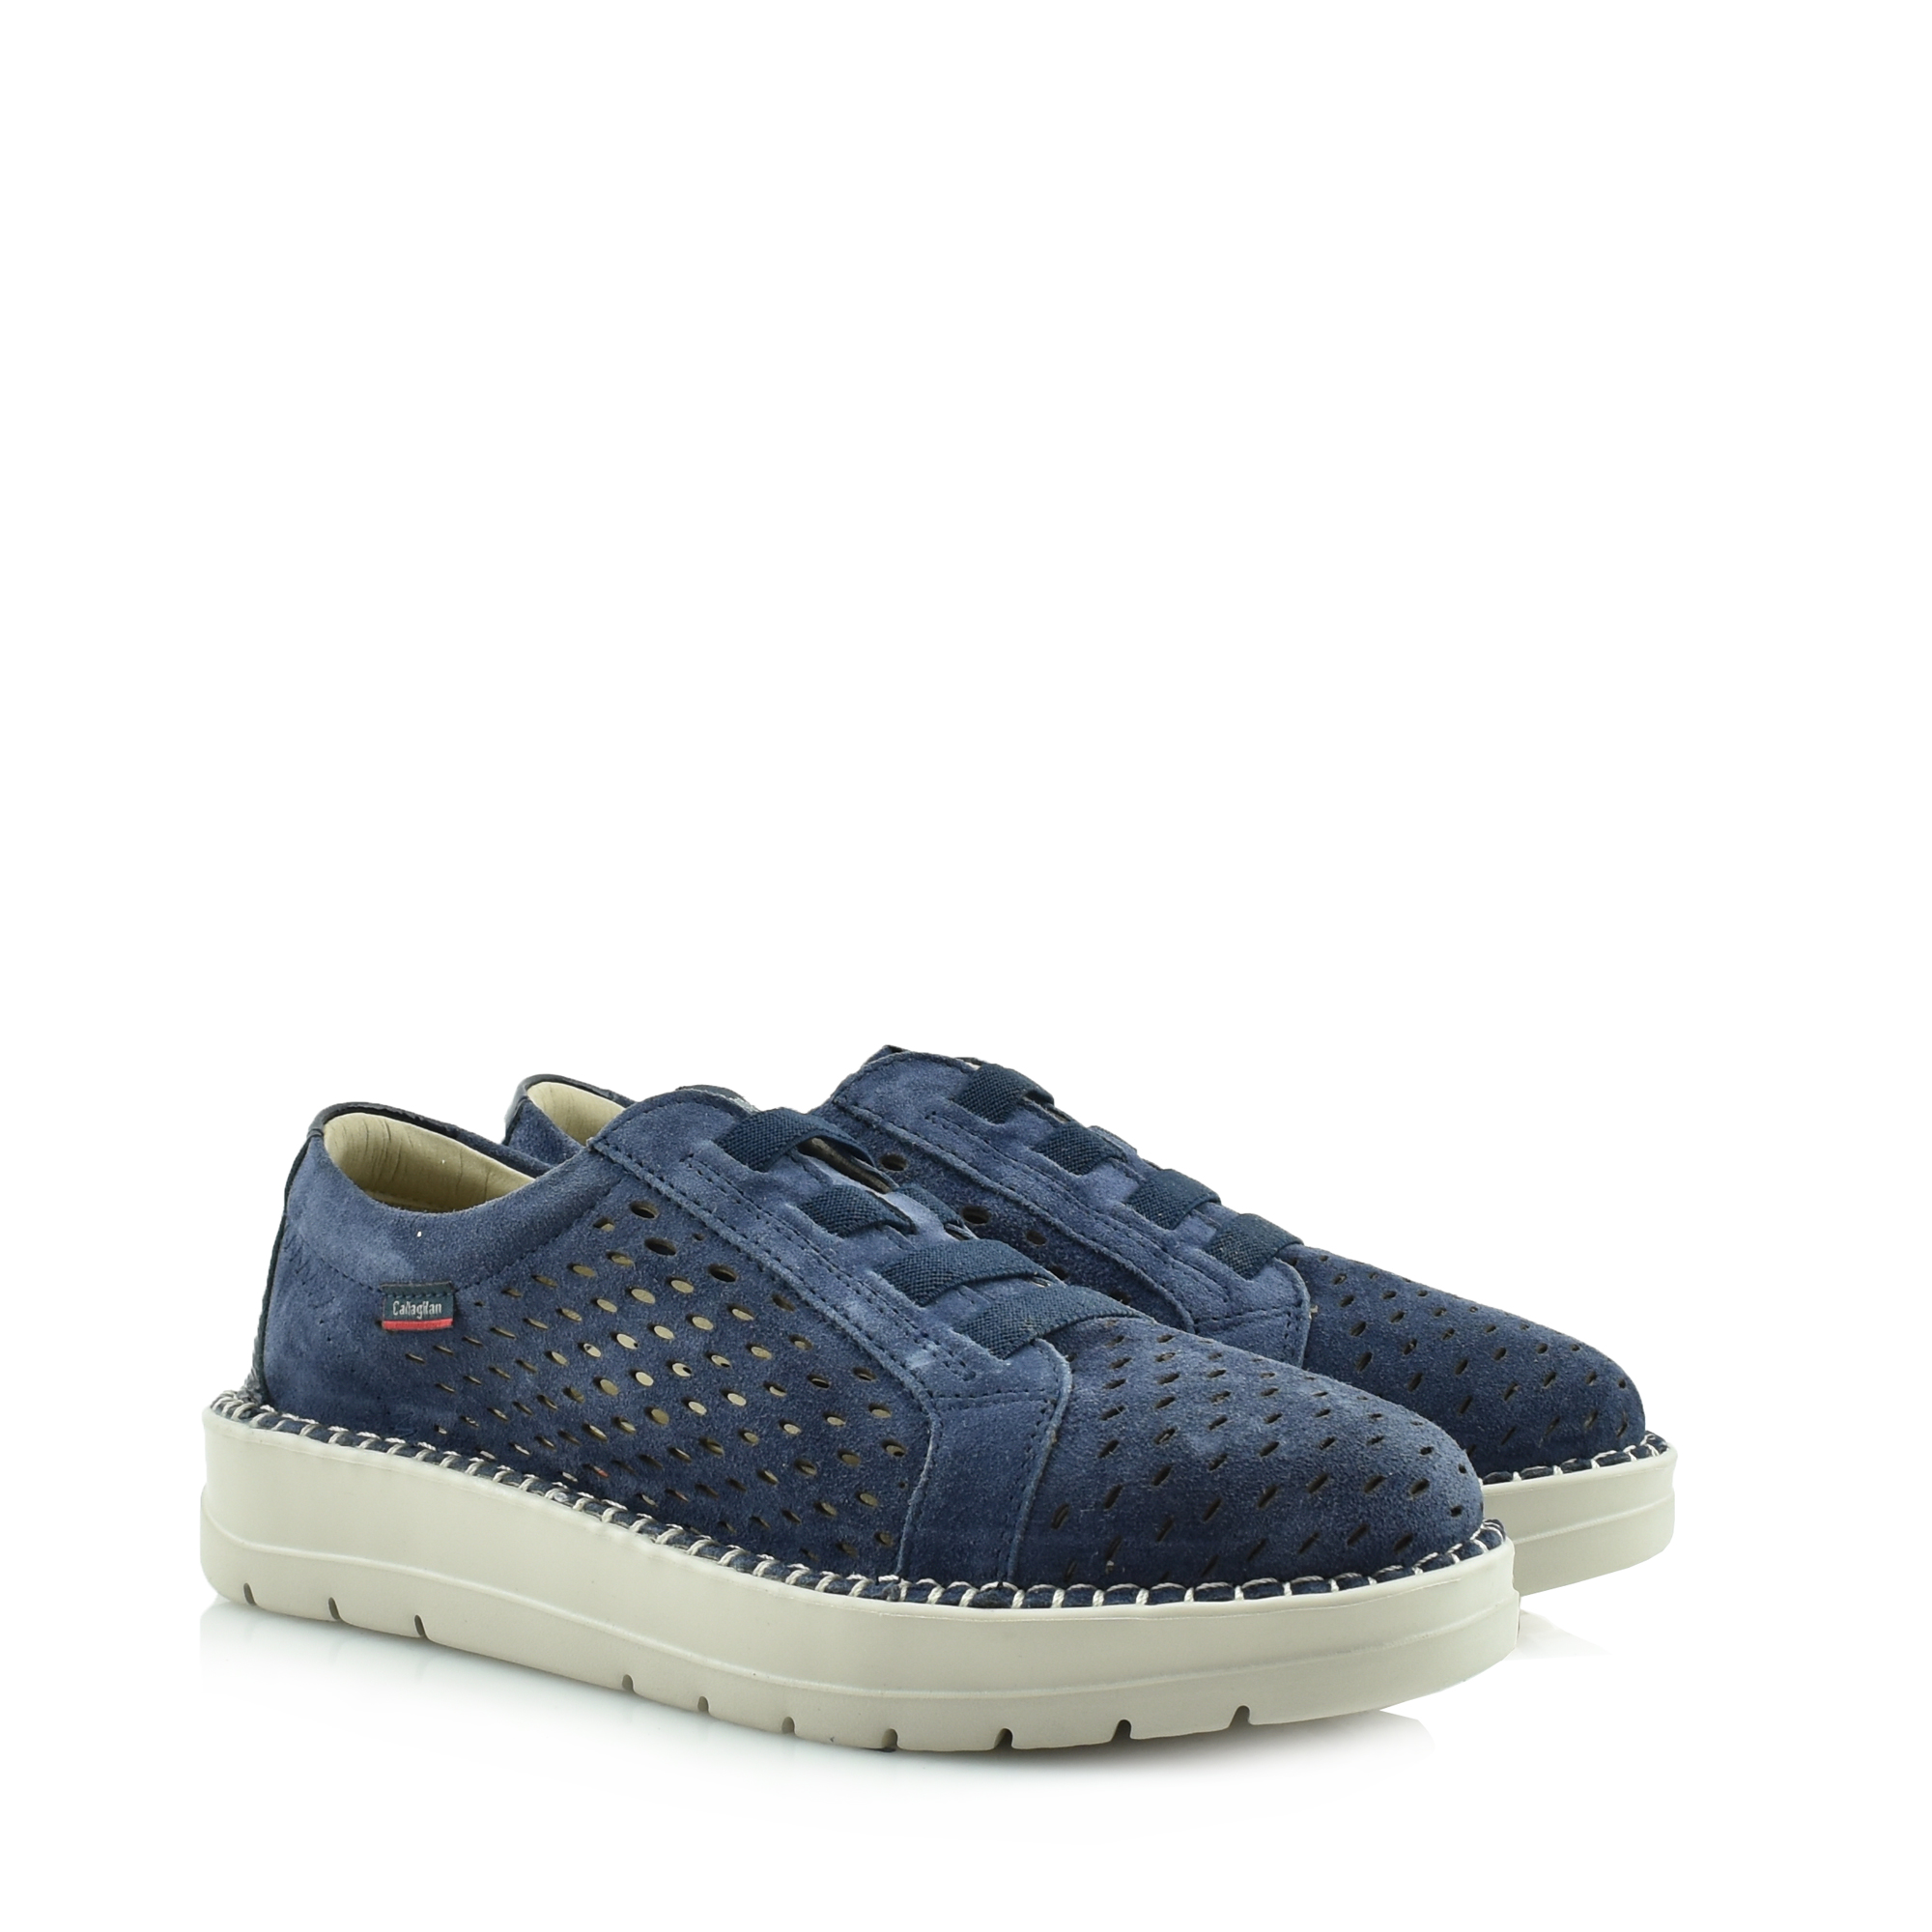 CALLAGHAN SUEDE SNEAKERS - 43700 PESCA